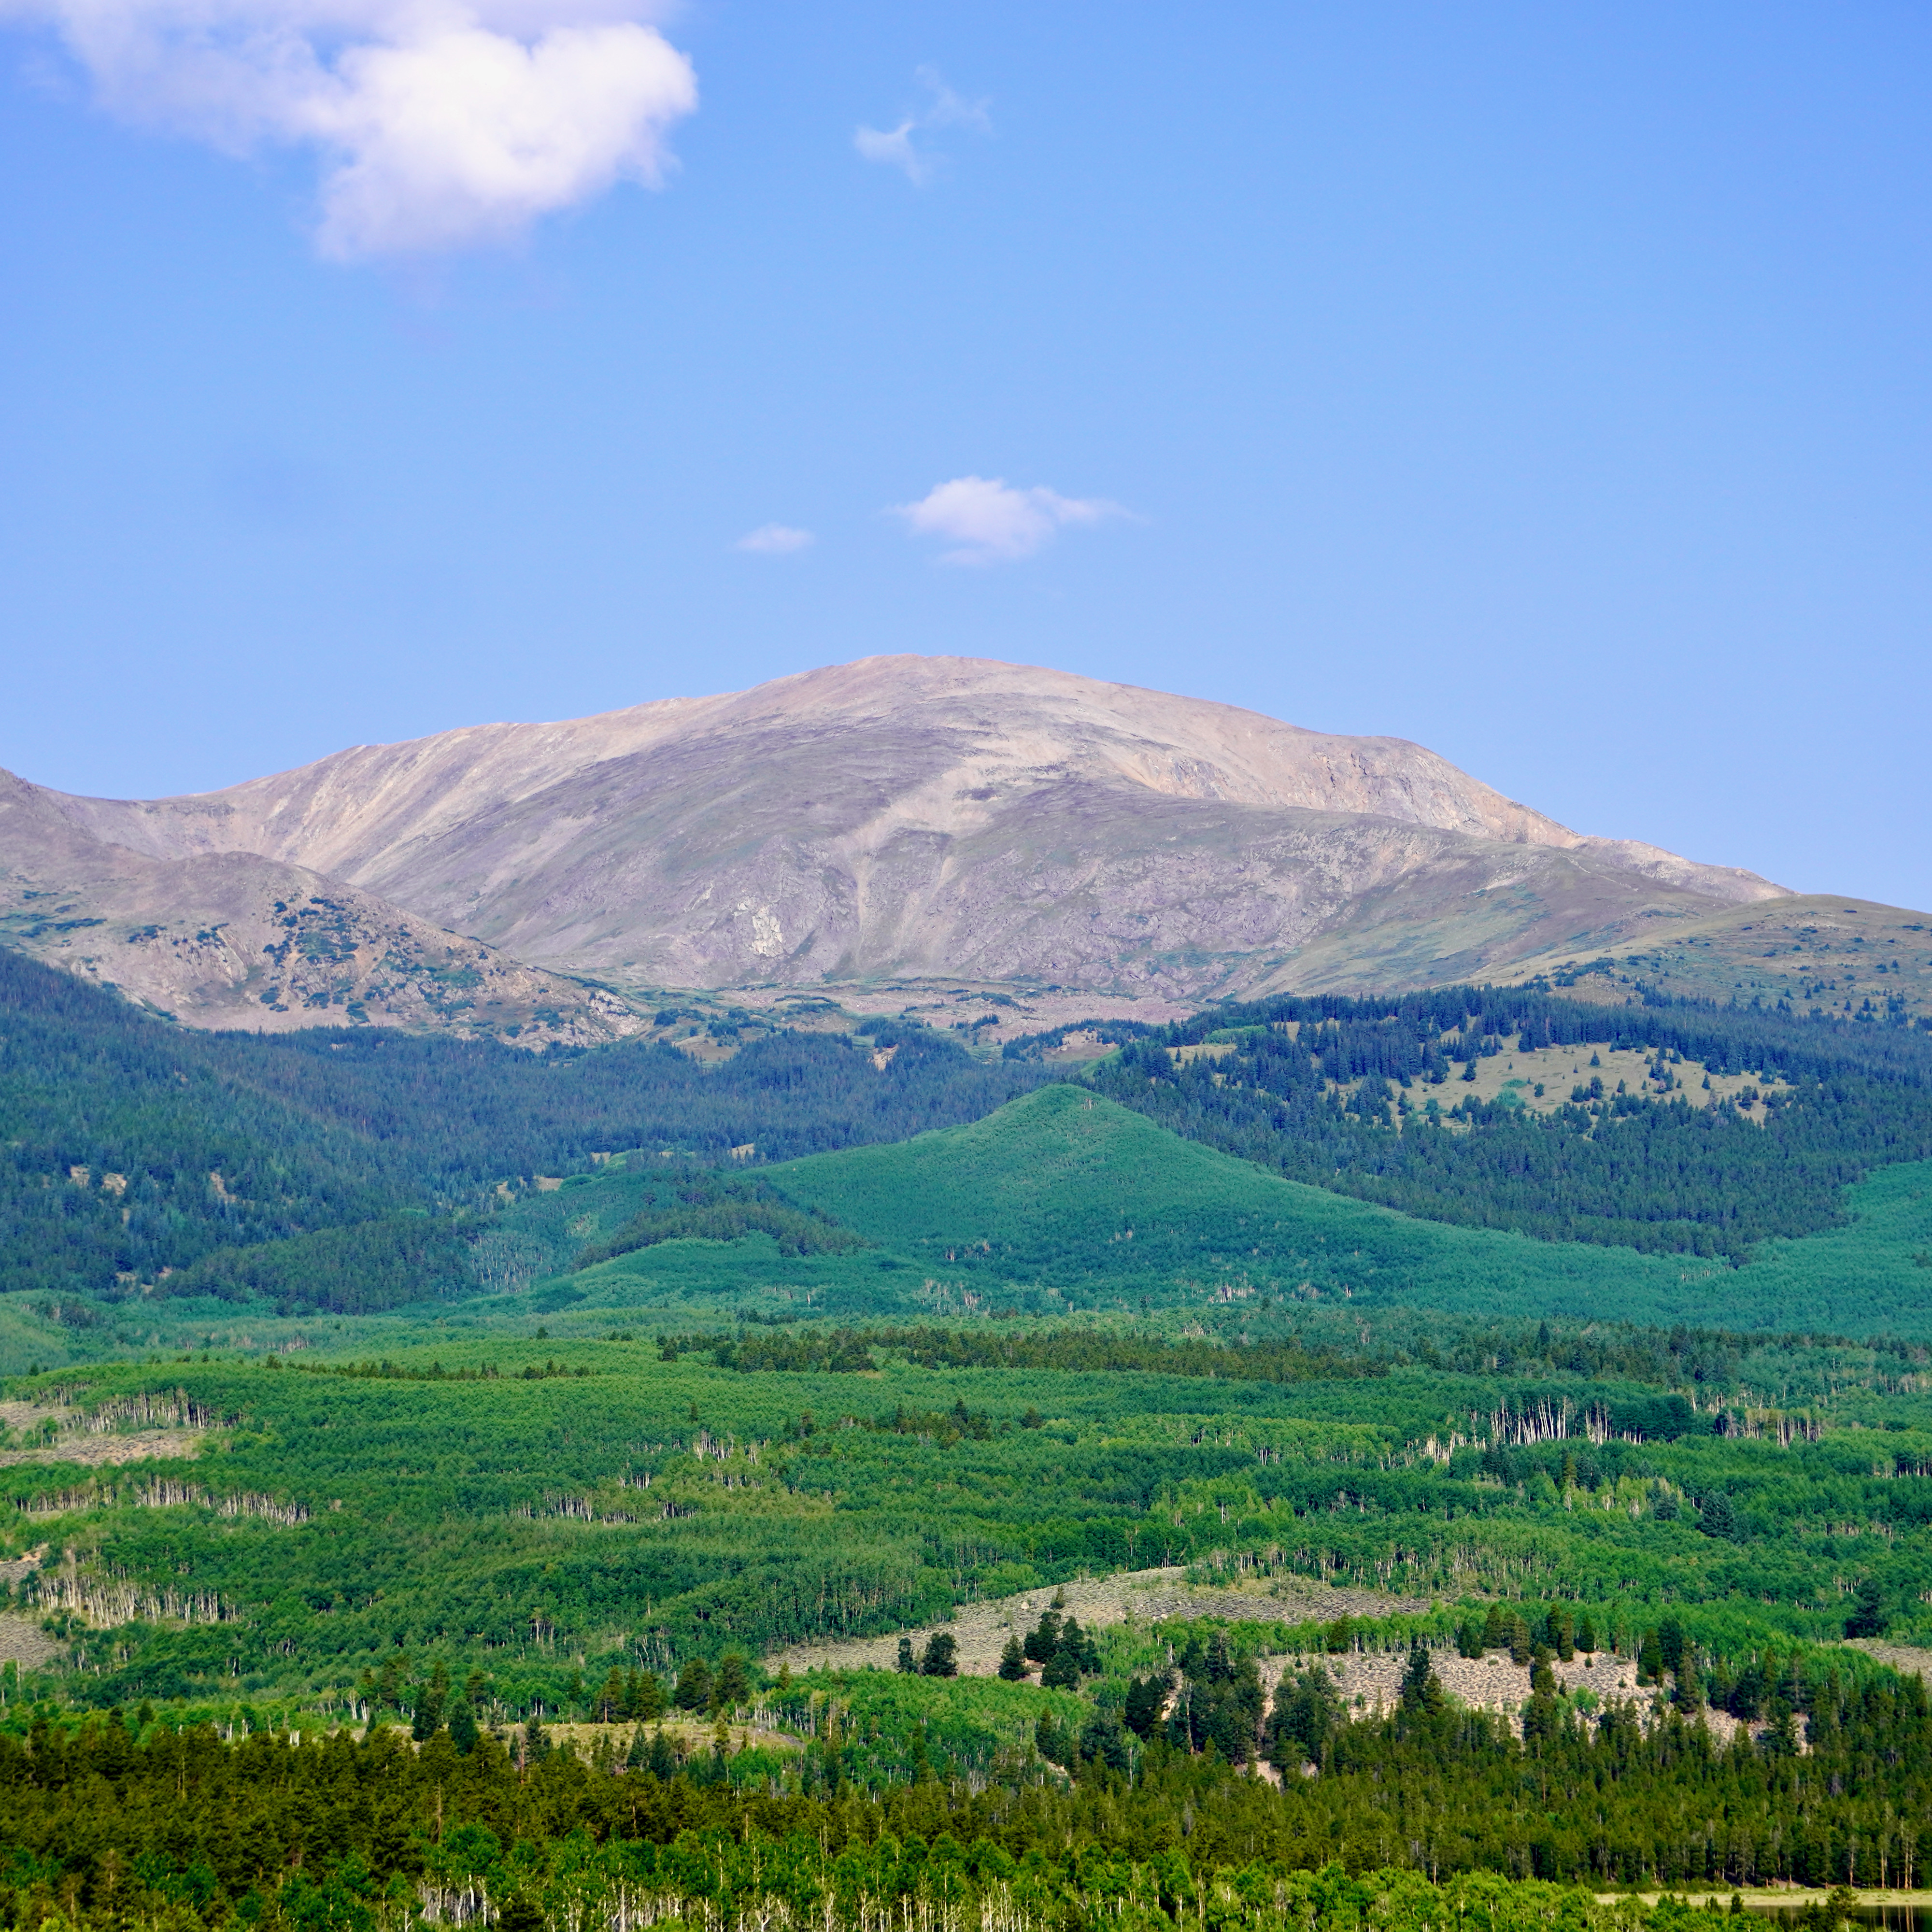 mt elbert with a brown peak and then green forest below tree line